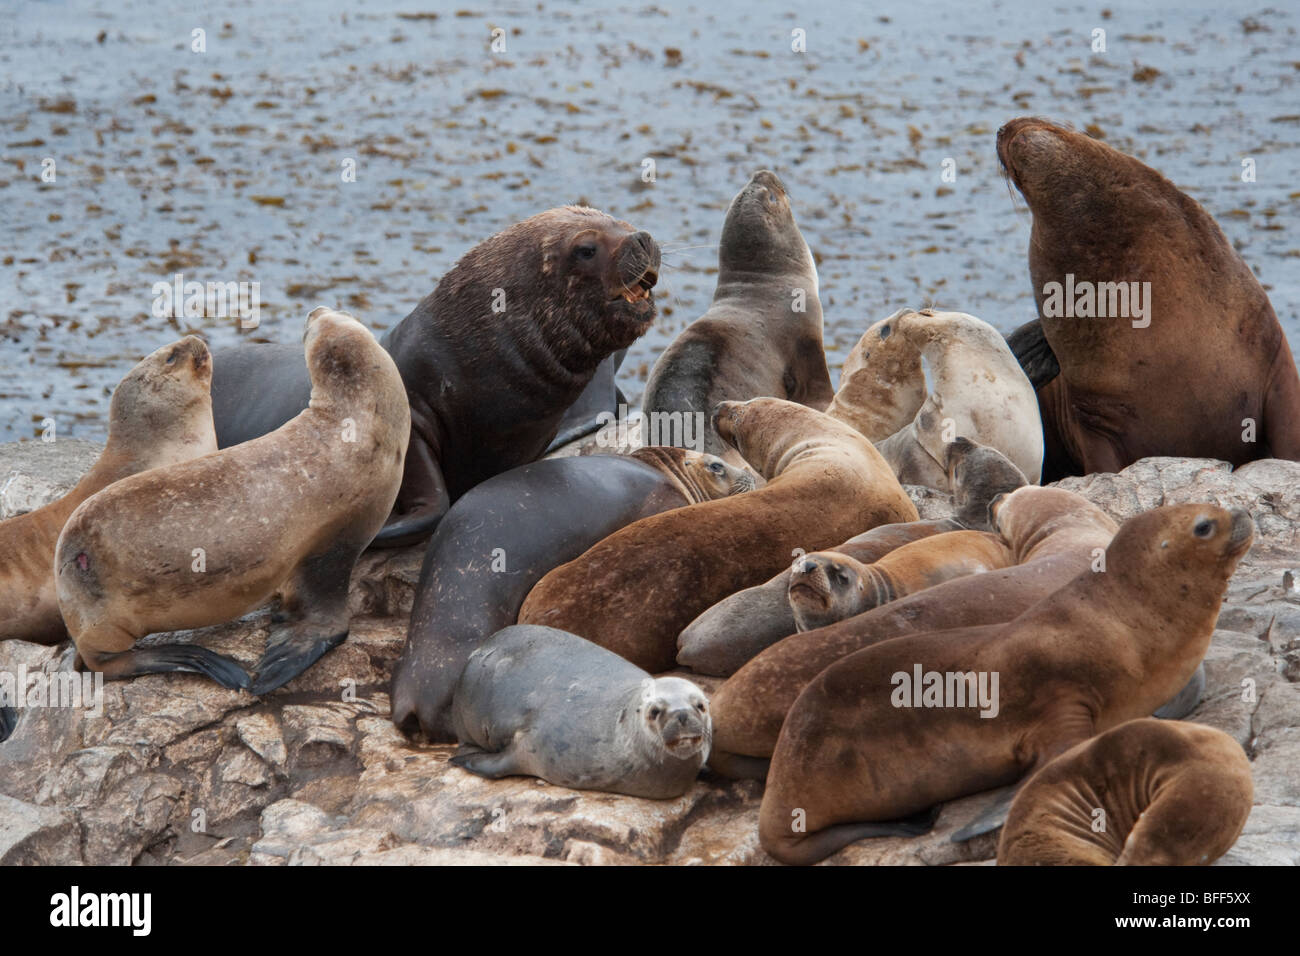 South American Sealions, Otaria flavescens/byronia,dominant bull growling at the rest of the rookery, Ushuaia, Beagle Channel. Stock Photo